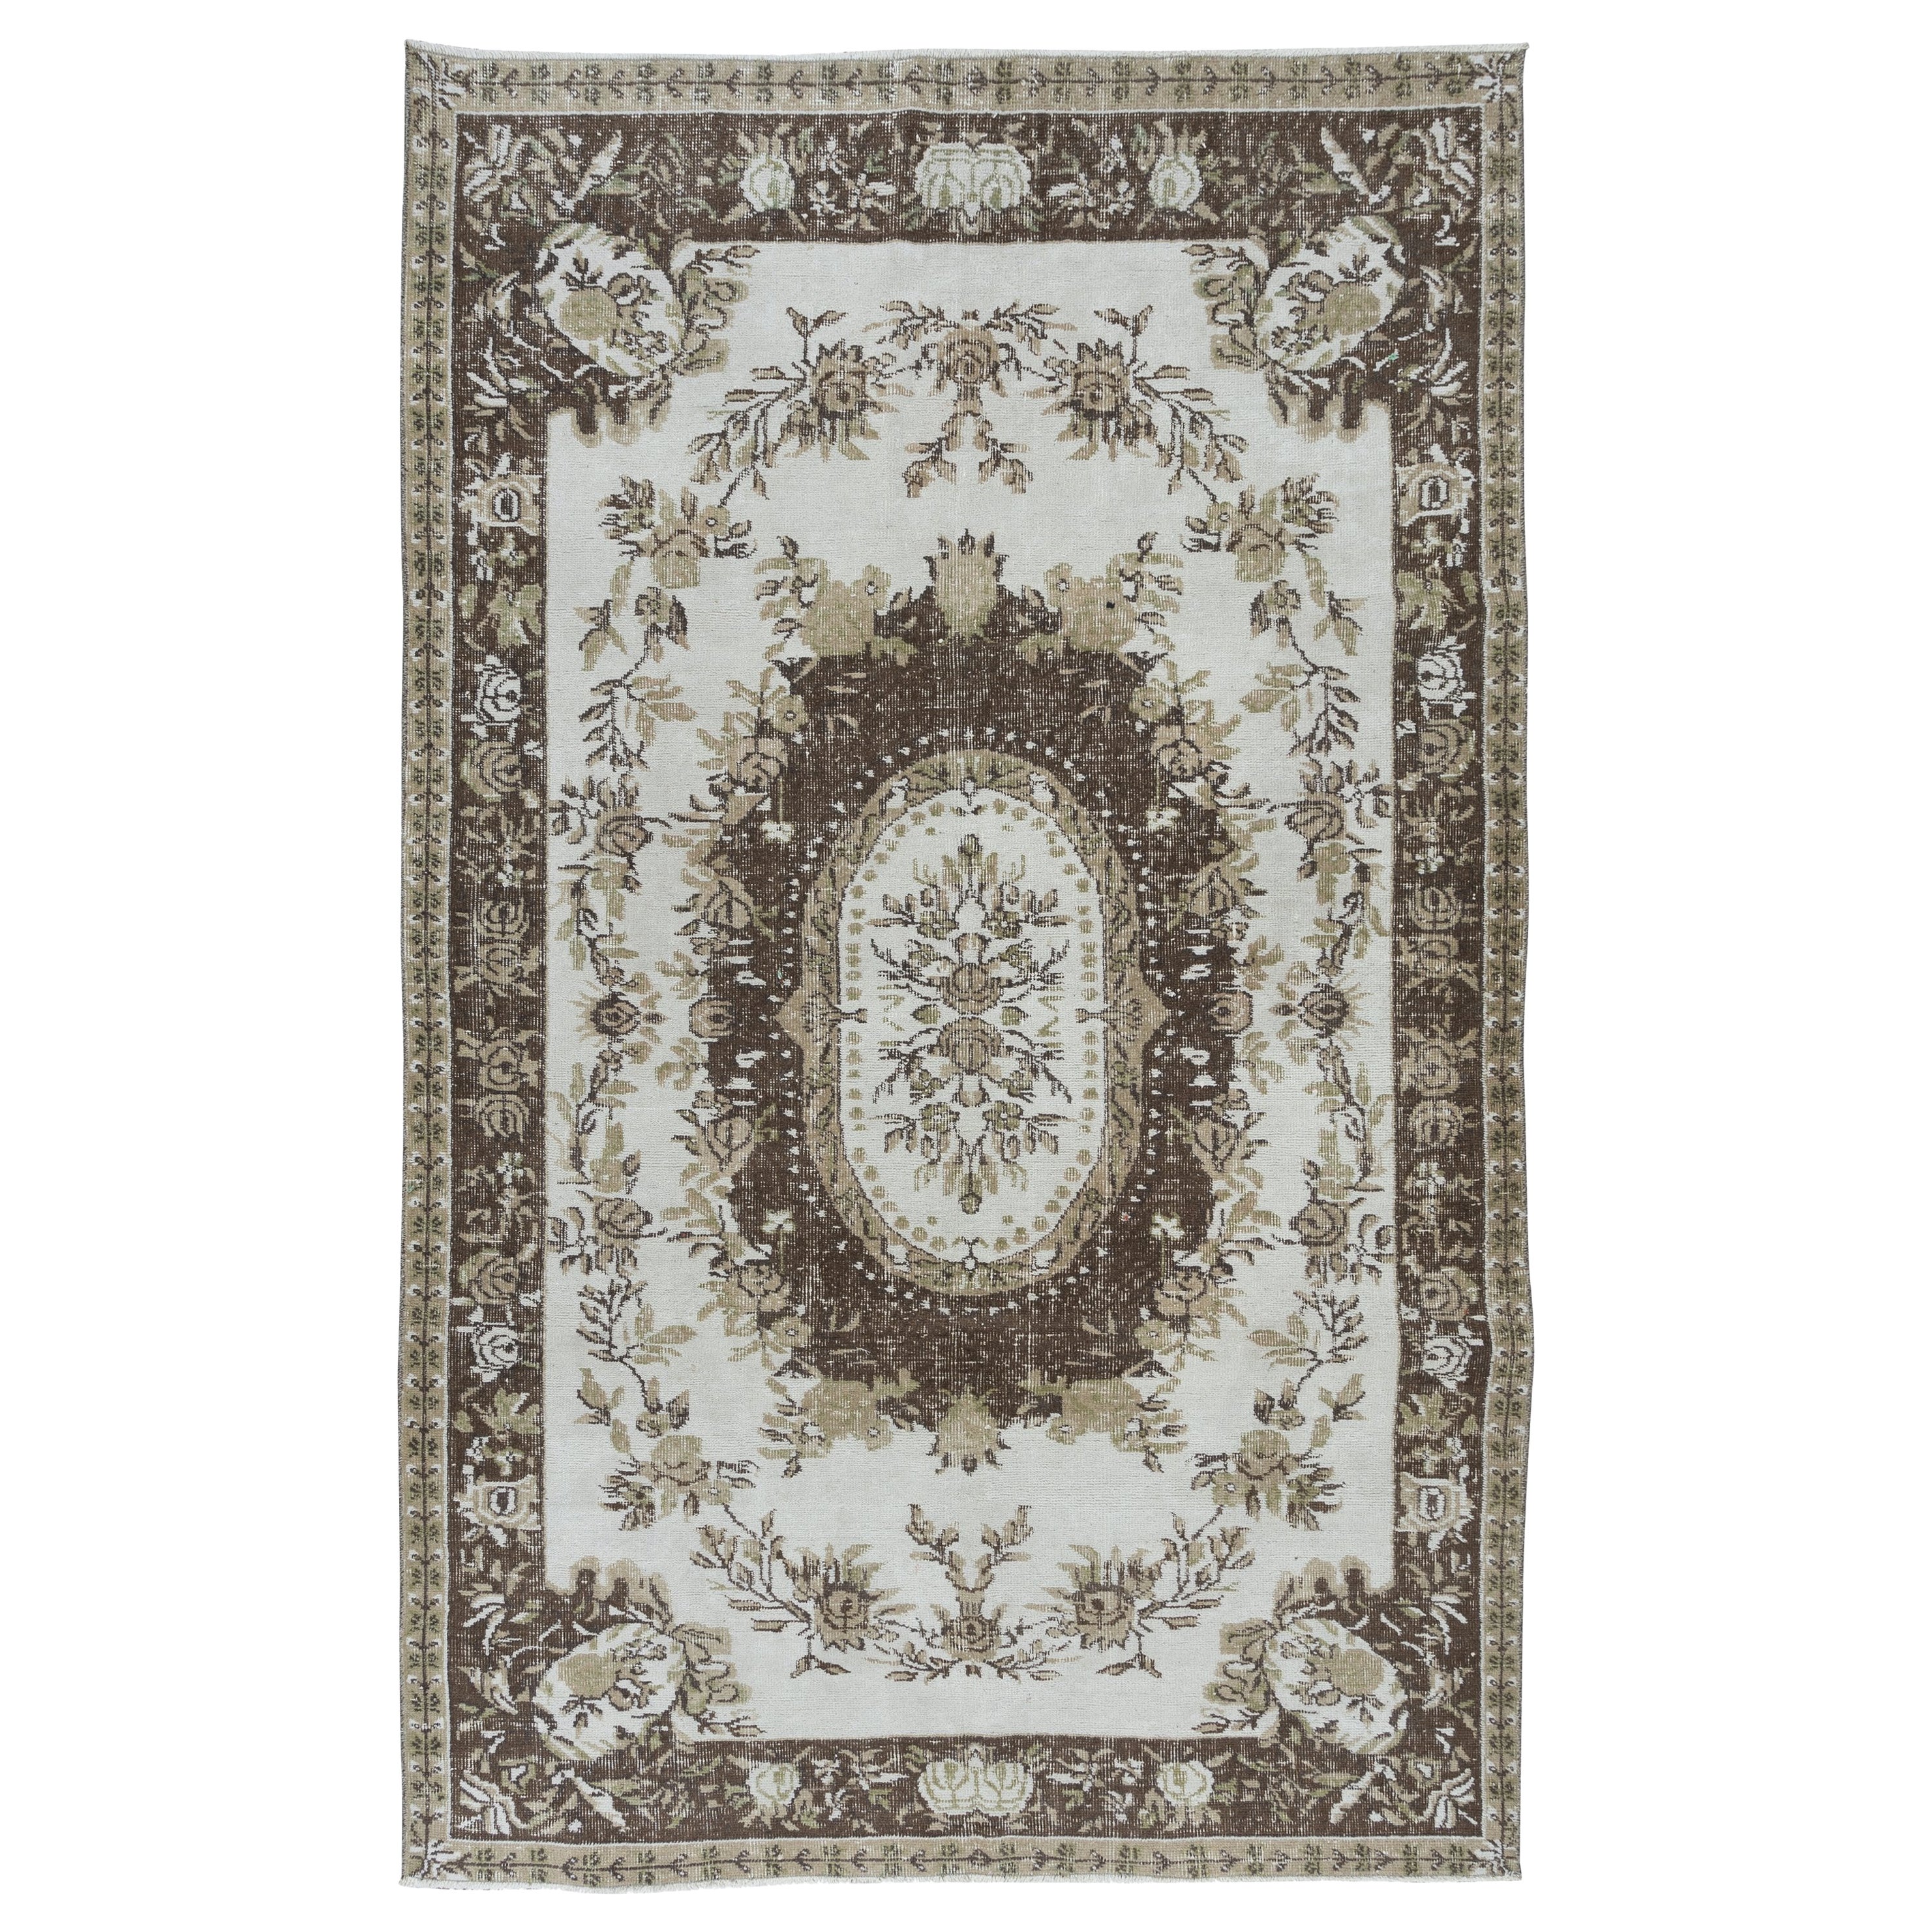 5.4x8.4 Ft Classic Aubusson Inspired Vintage Handmade Faded Rug in Beige & Brown